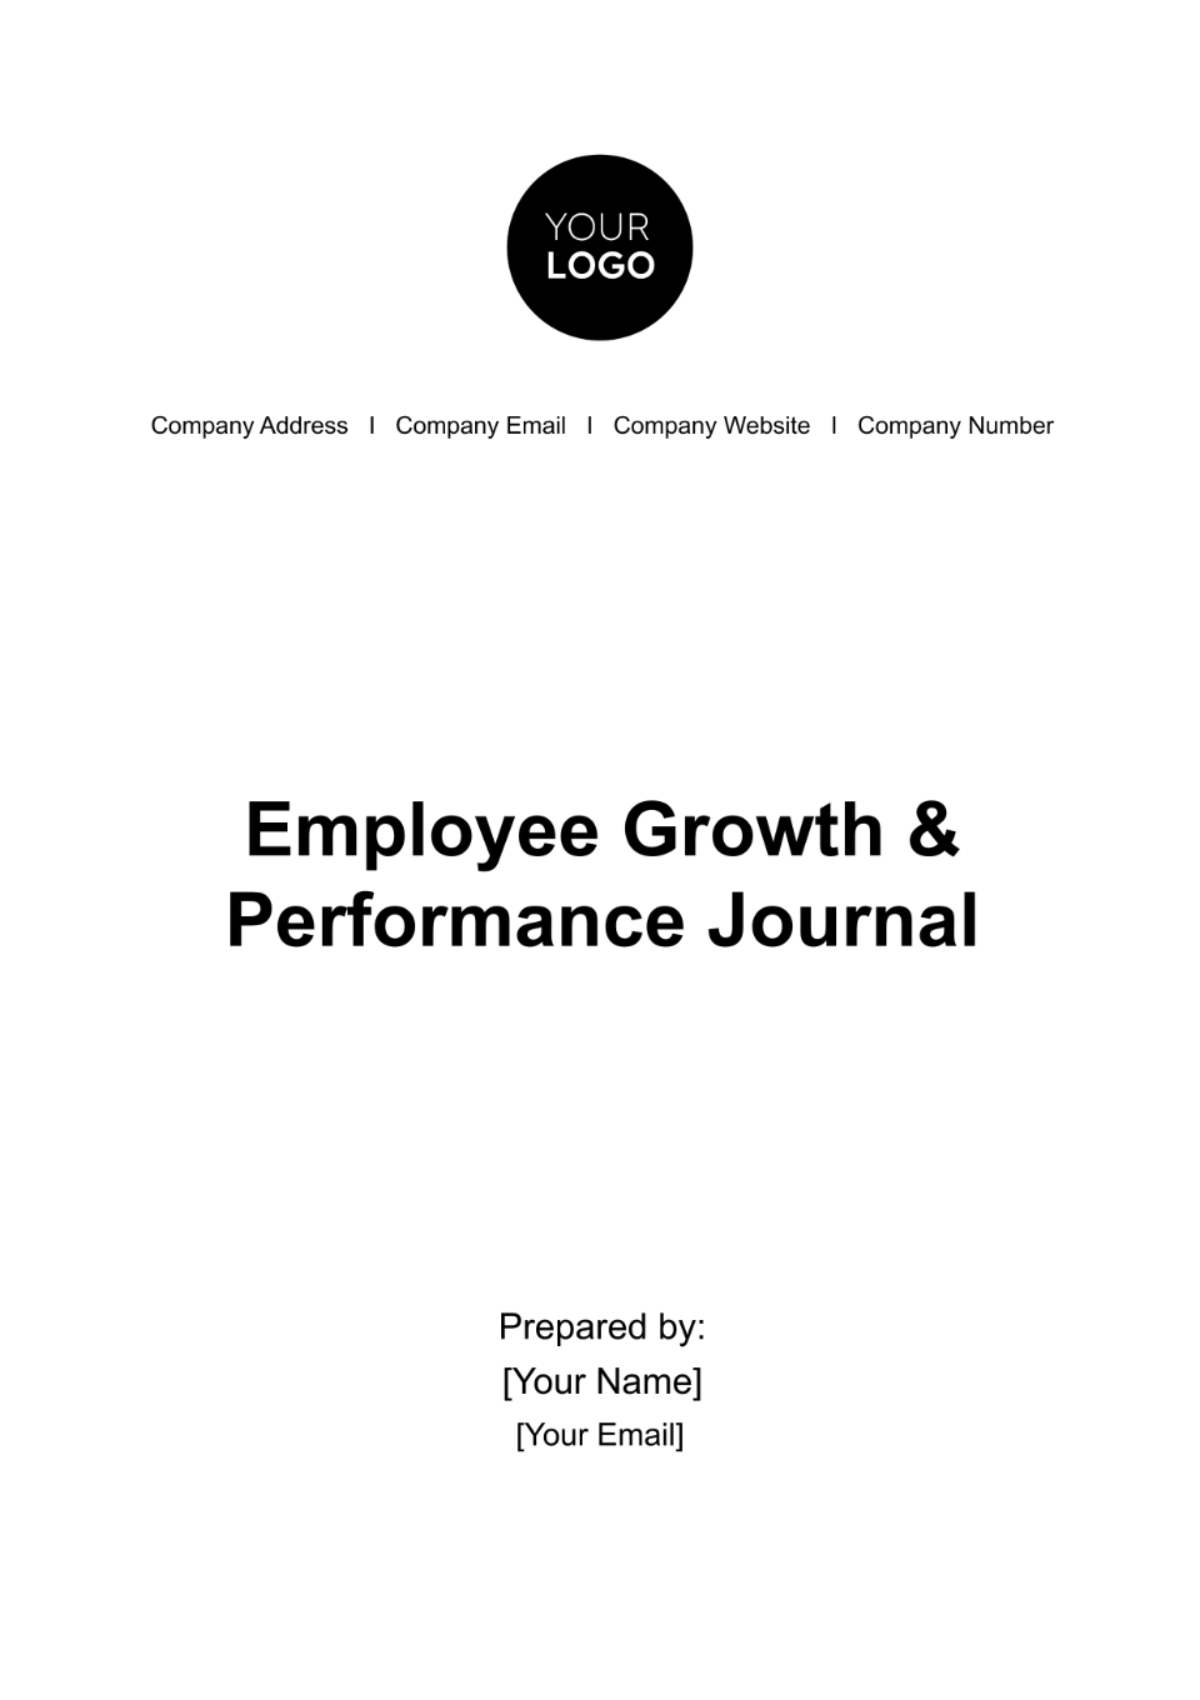 Free Employee Growth & Performance Journal HR Template